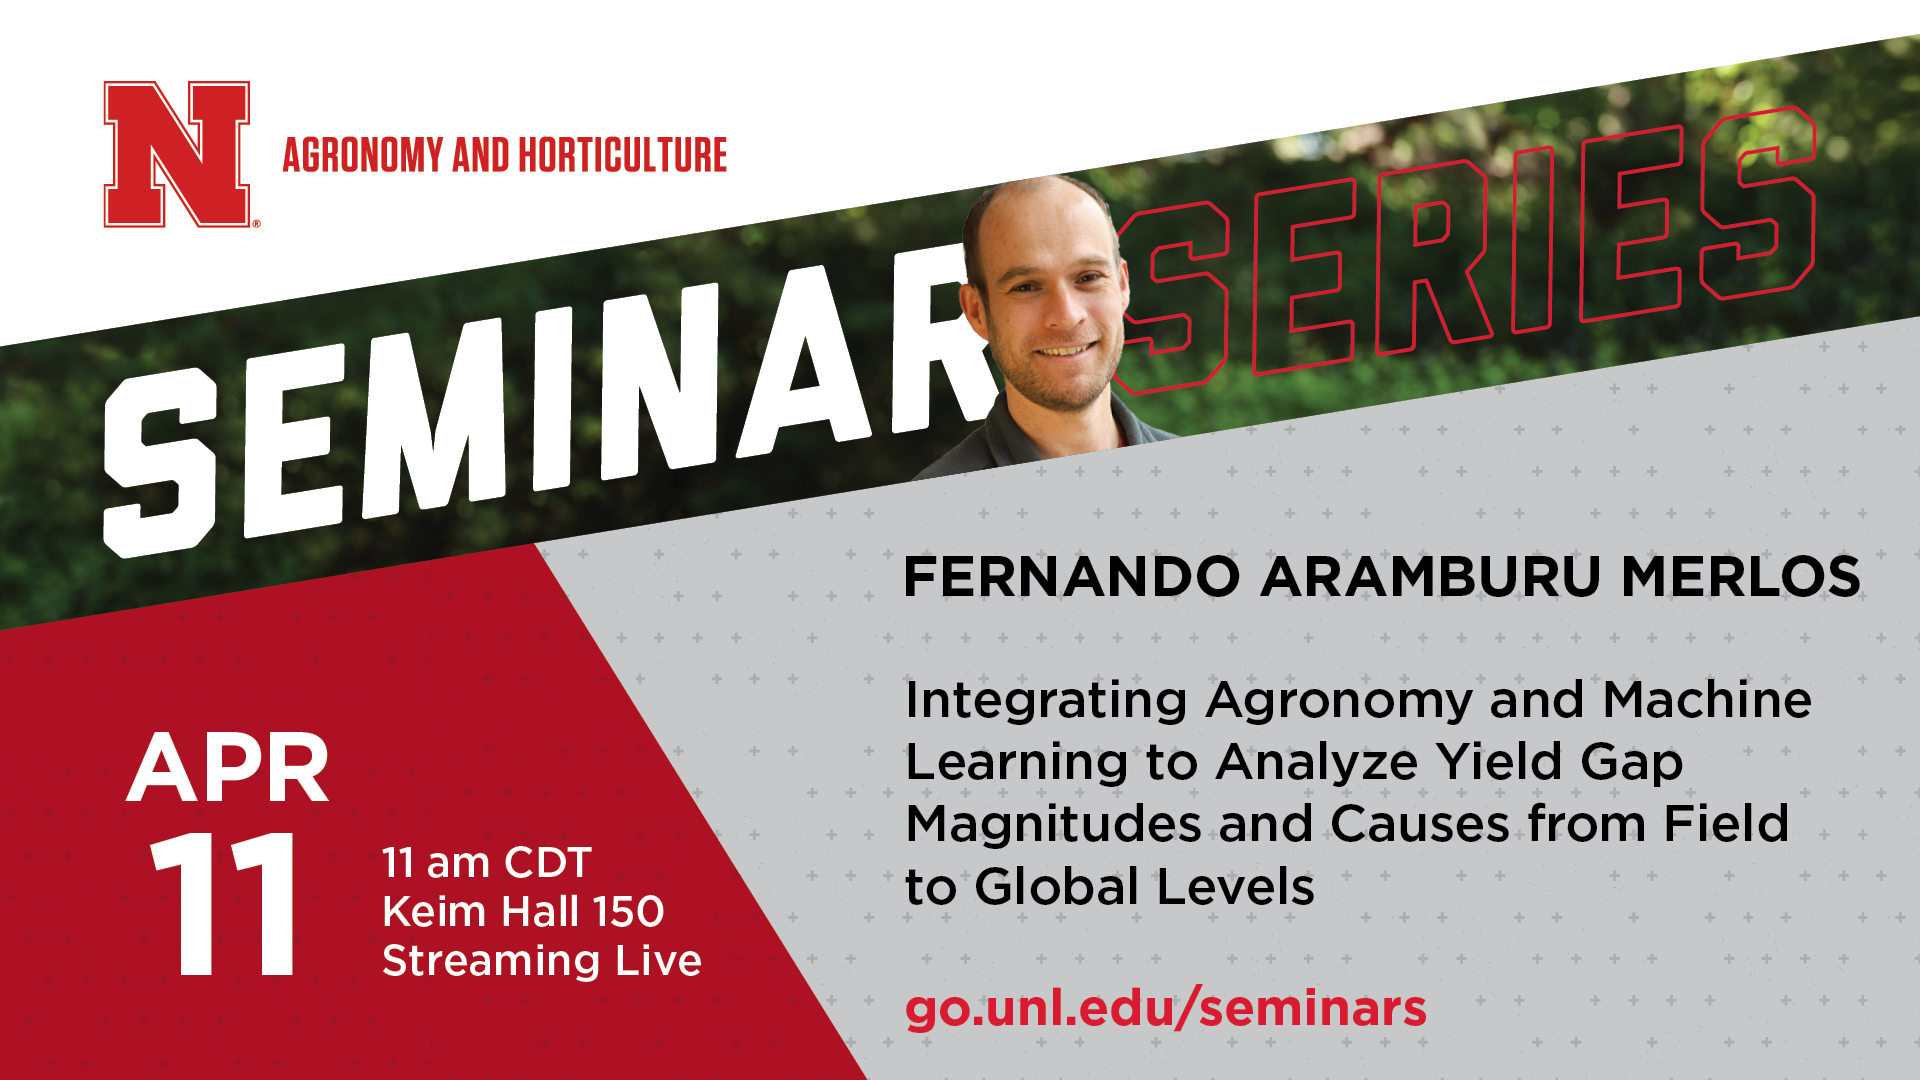 Fernando Aramburu Merlos, research assistant professor in the Department of Agronomy and Horticulture at the University of Nebraska–Lincoln, will present the next Agronomy and Horticulture seminar on April 11.